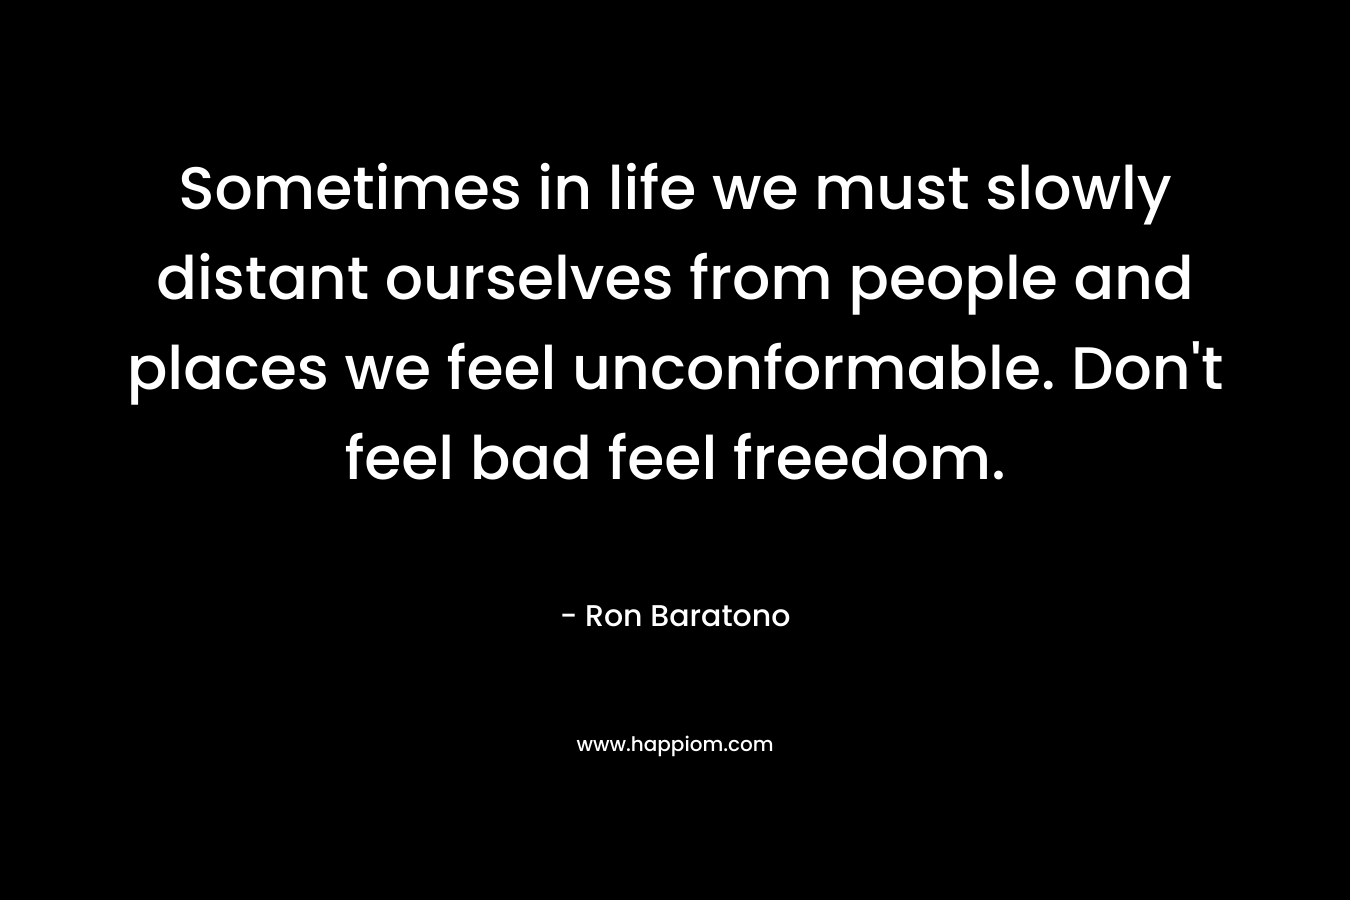 Sometimes in life we must slowly distant ourselves from people and places we feel unconformable. Don’t feel bad feel freedom. – Ron Baratono